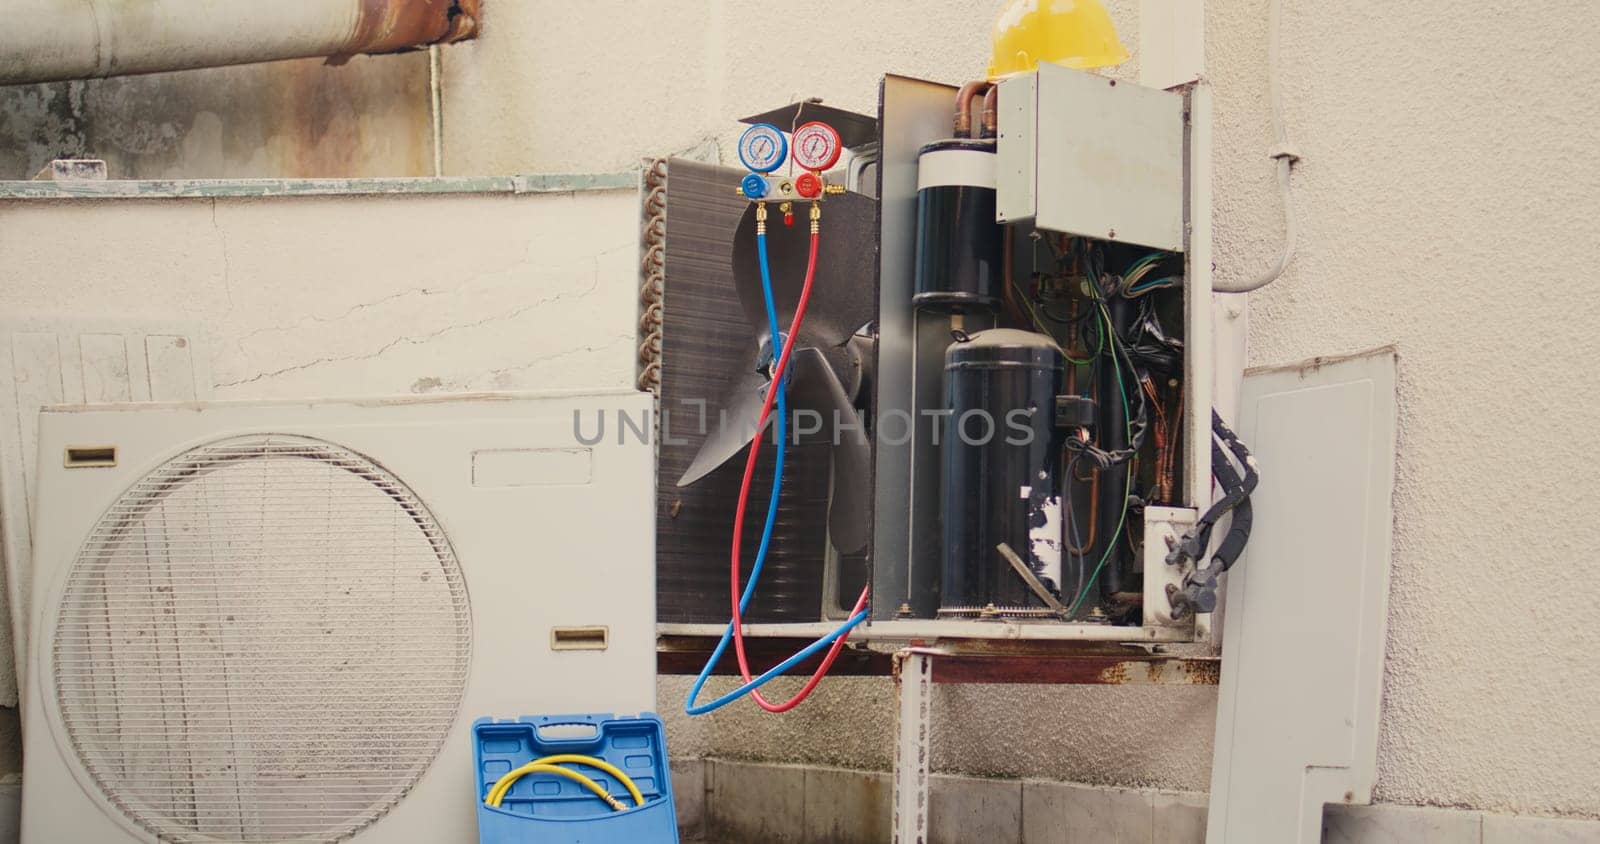 Revealing handheld camera shot of broken outdoor air cooling unit in need of fixing, with malfunctioning electric internal parts and wiring. Air conditioner not working anymore, ready to be fixed